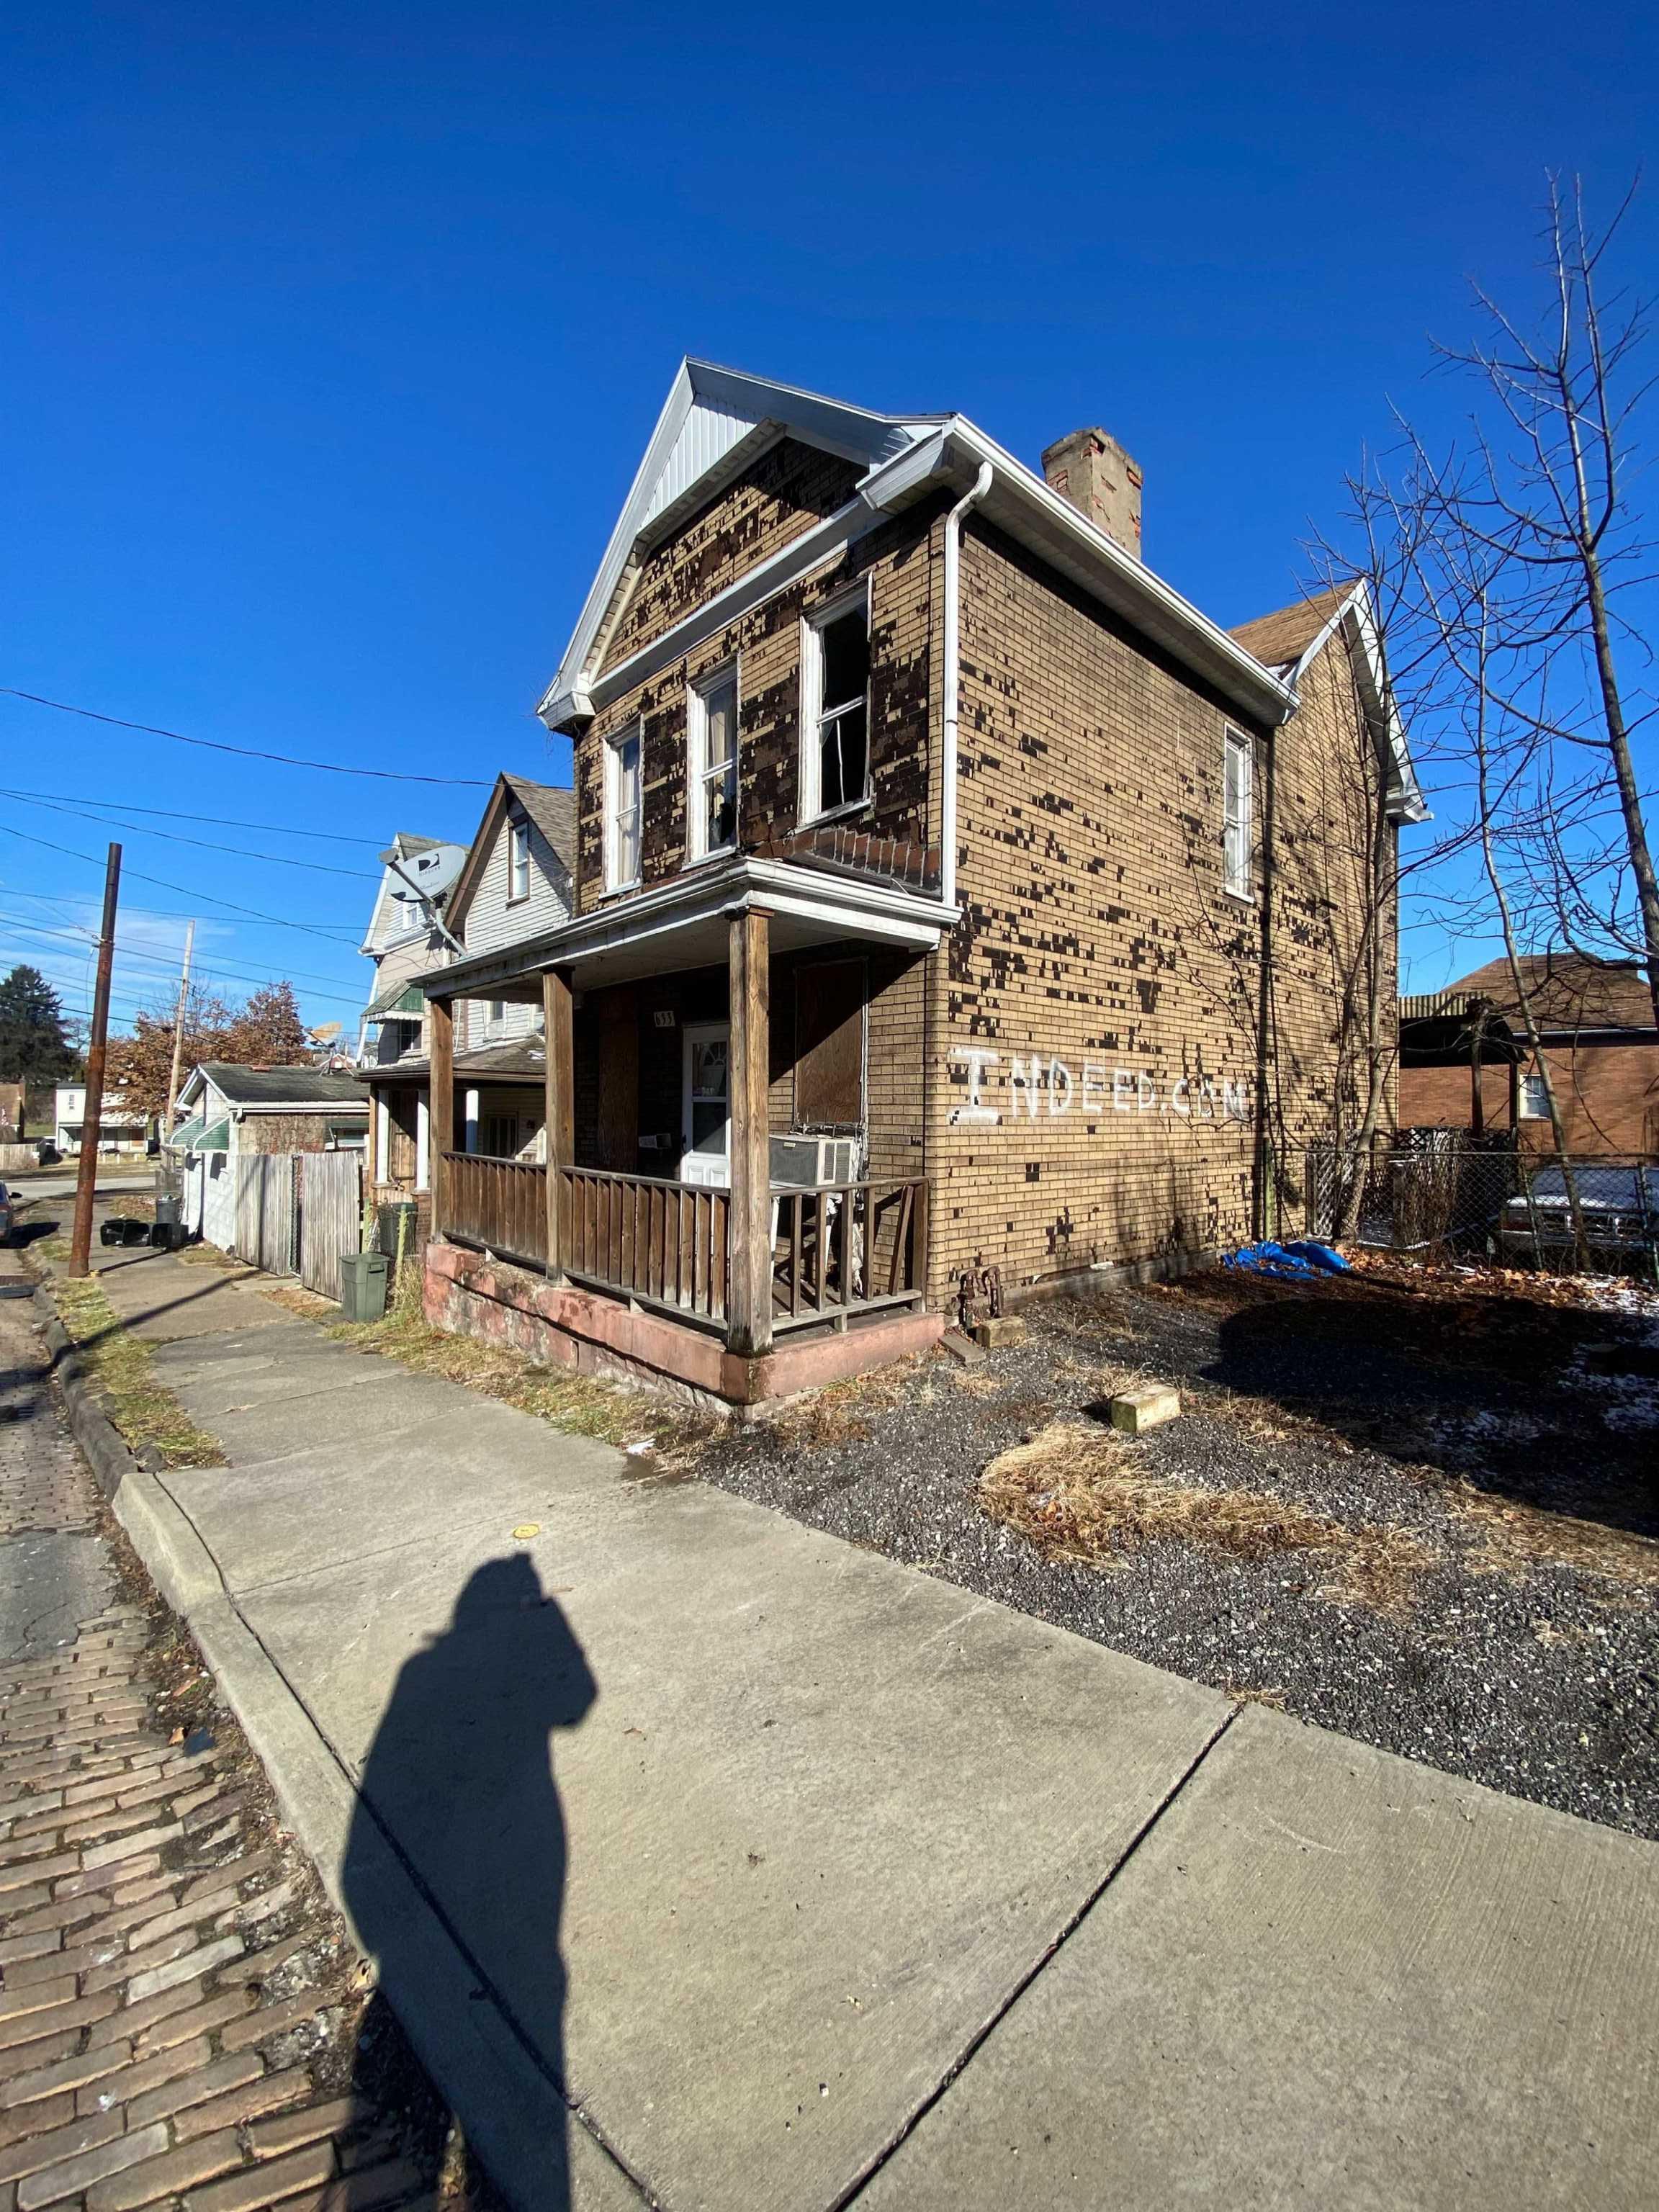 633 Catherine St, Duquesne, PA